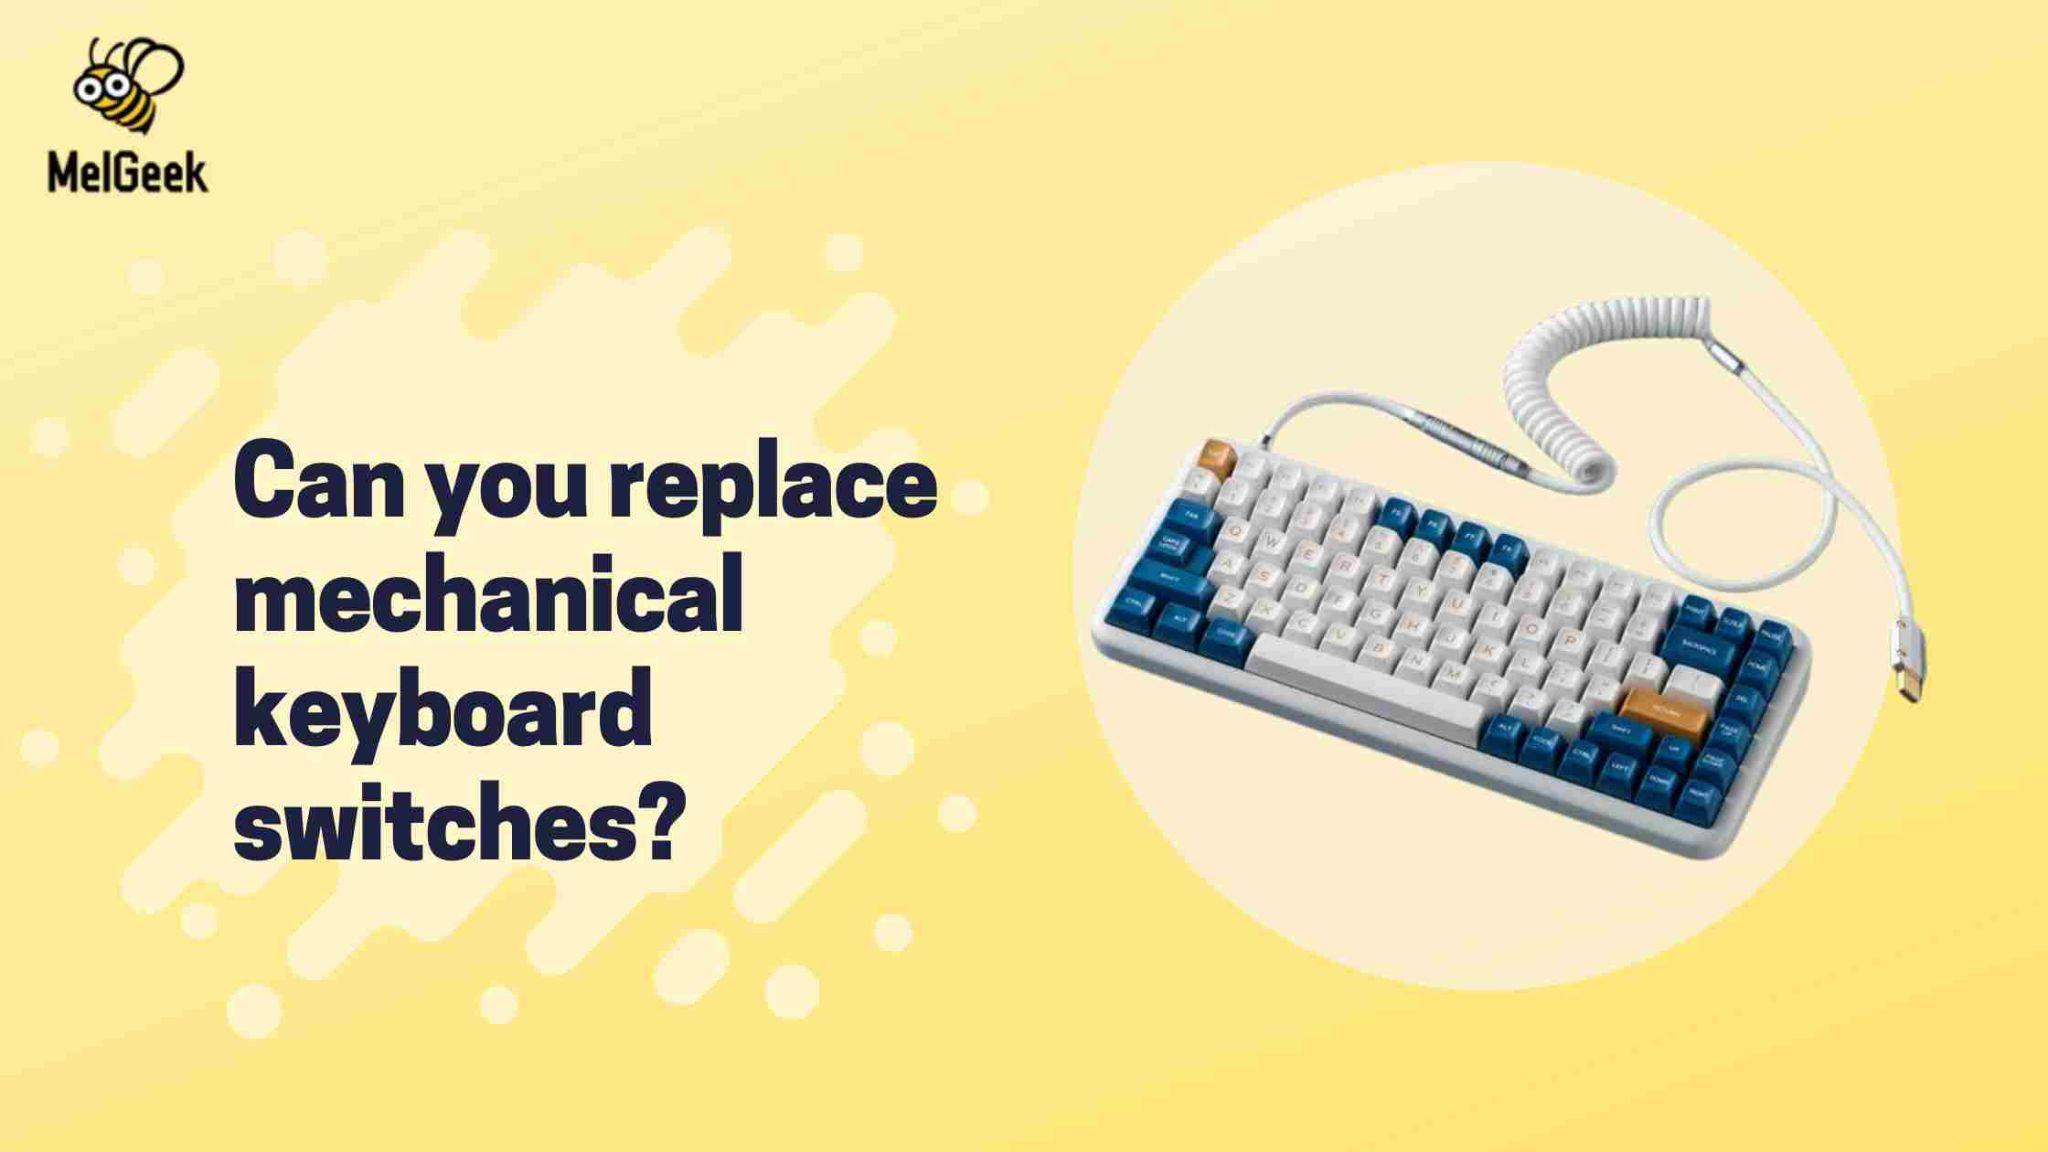 Can you replace mechanical keyboard switches?